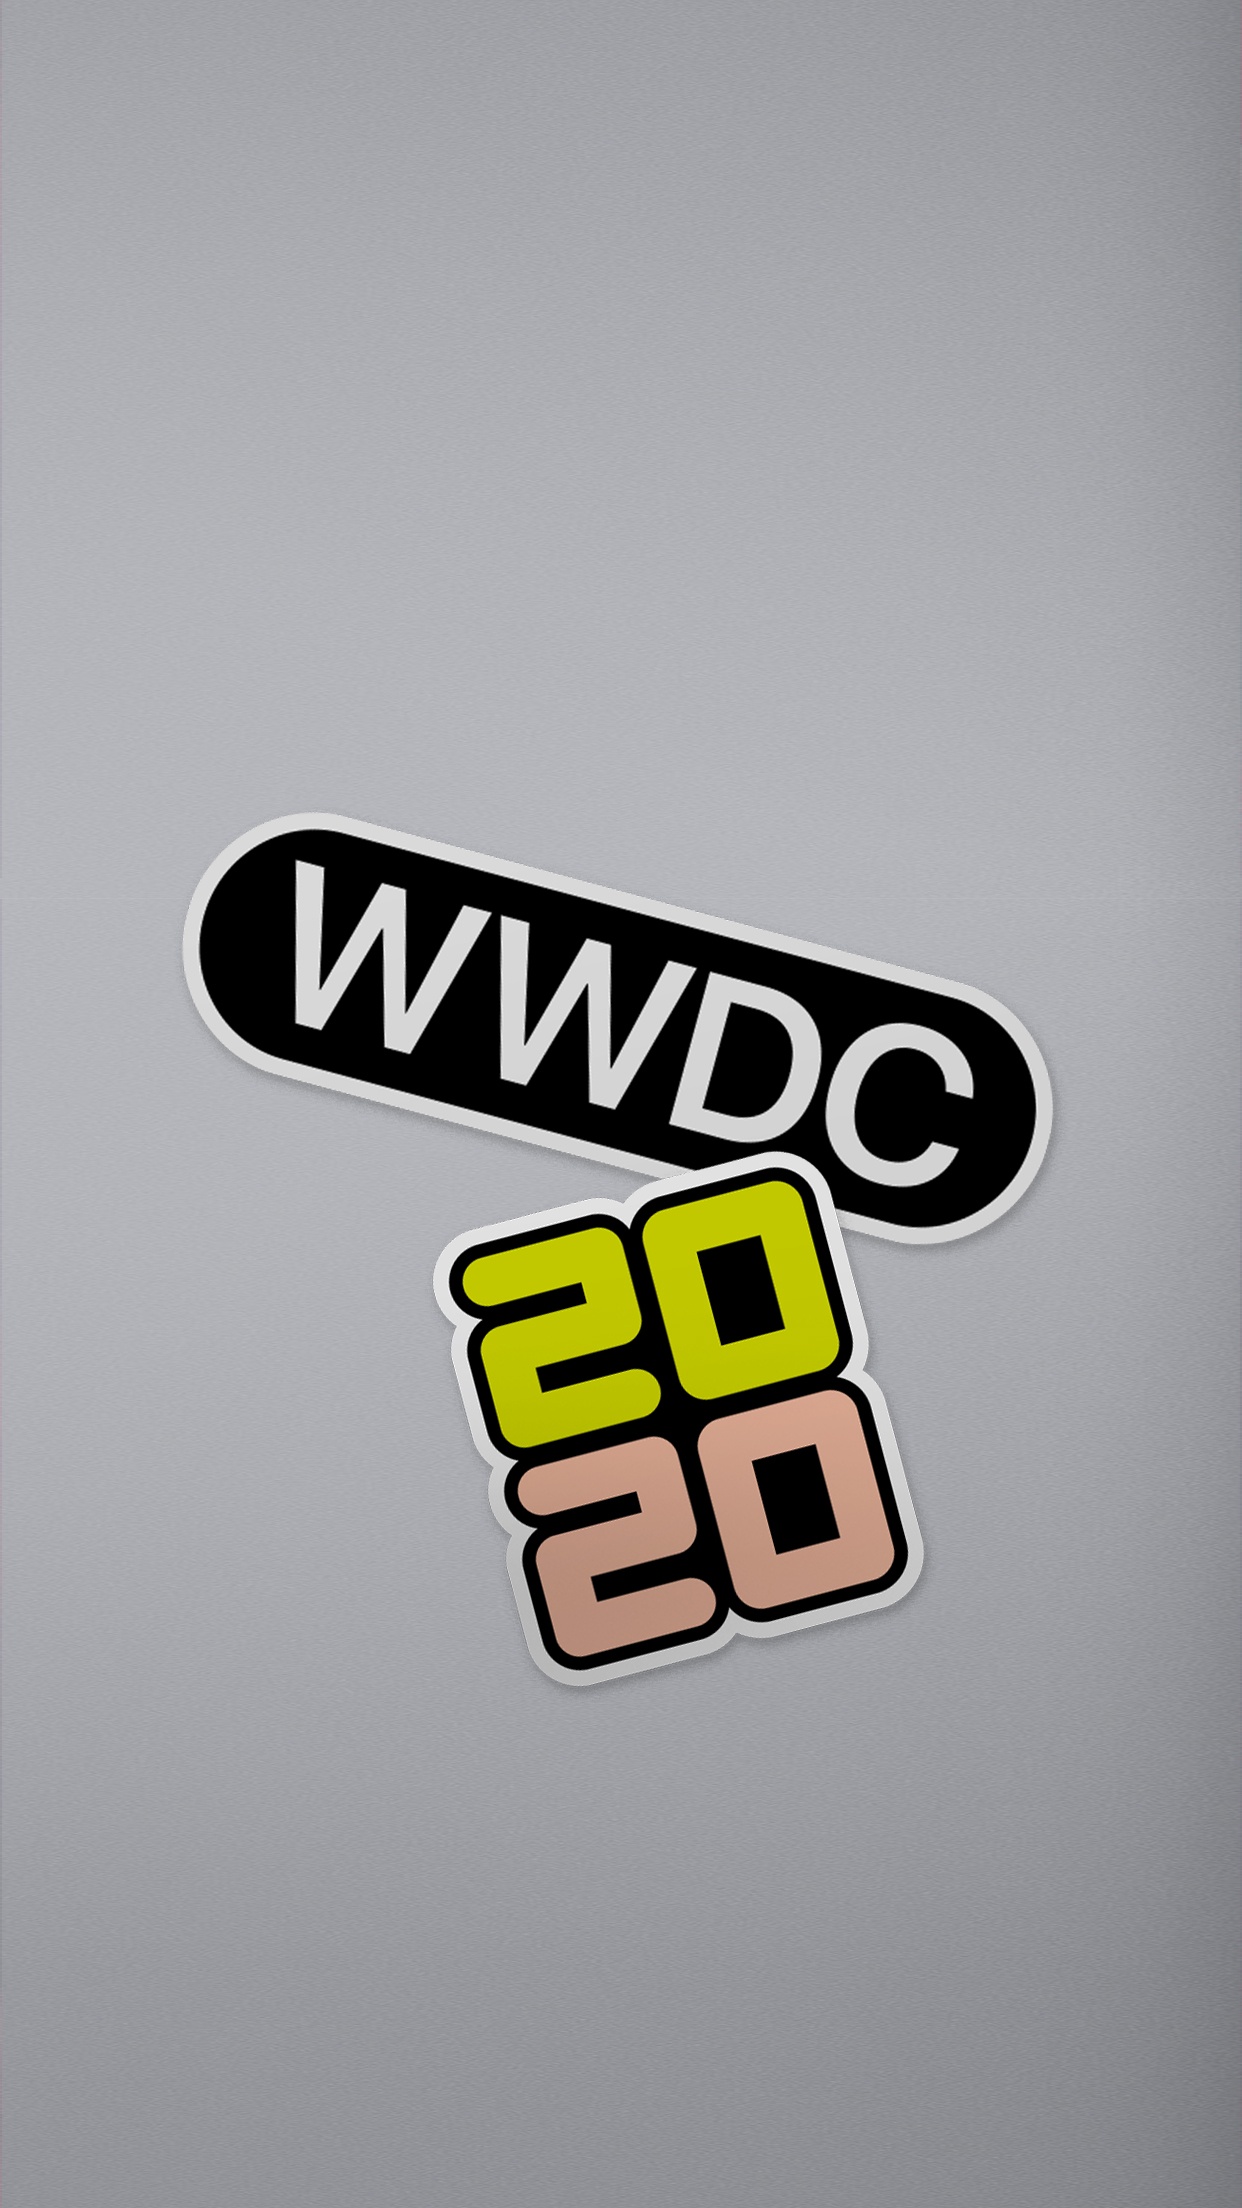 WWDC 2020 Official Wallpaper - #WWDC20 - Wallpapers Central